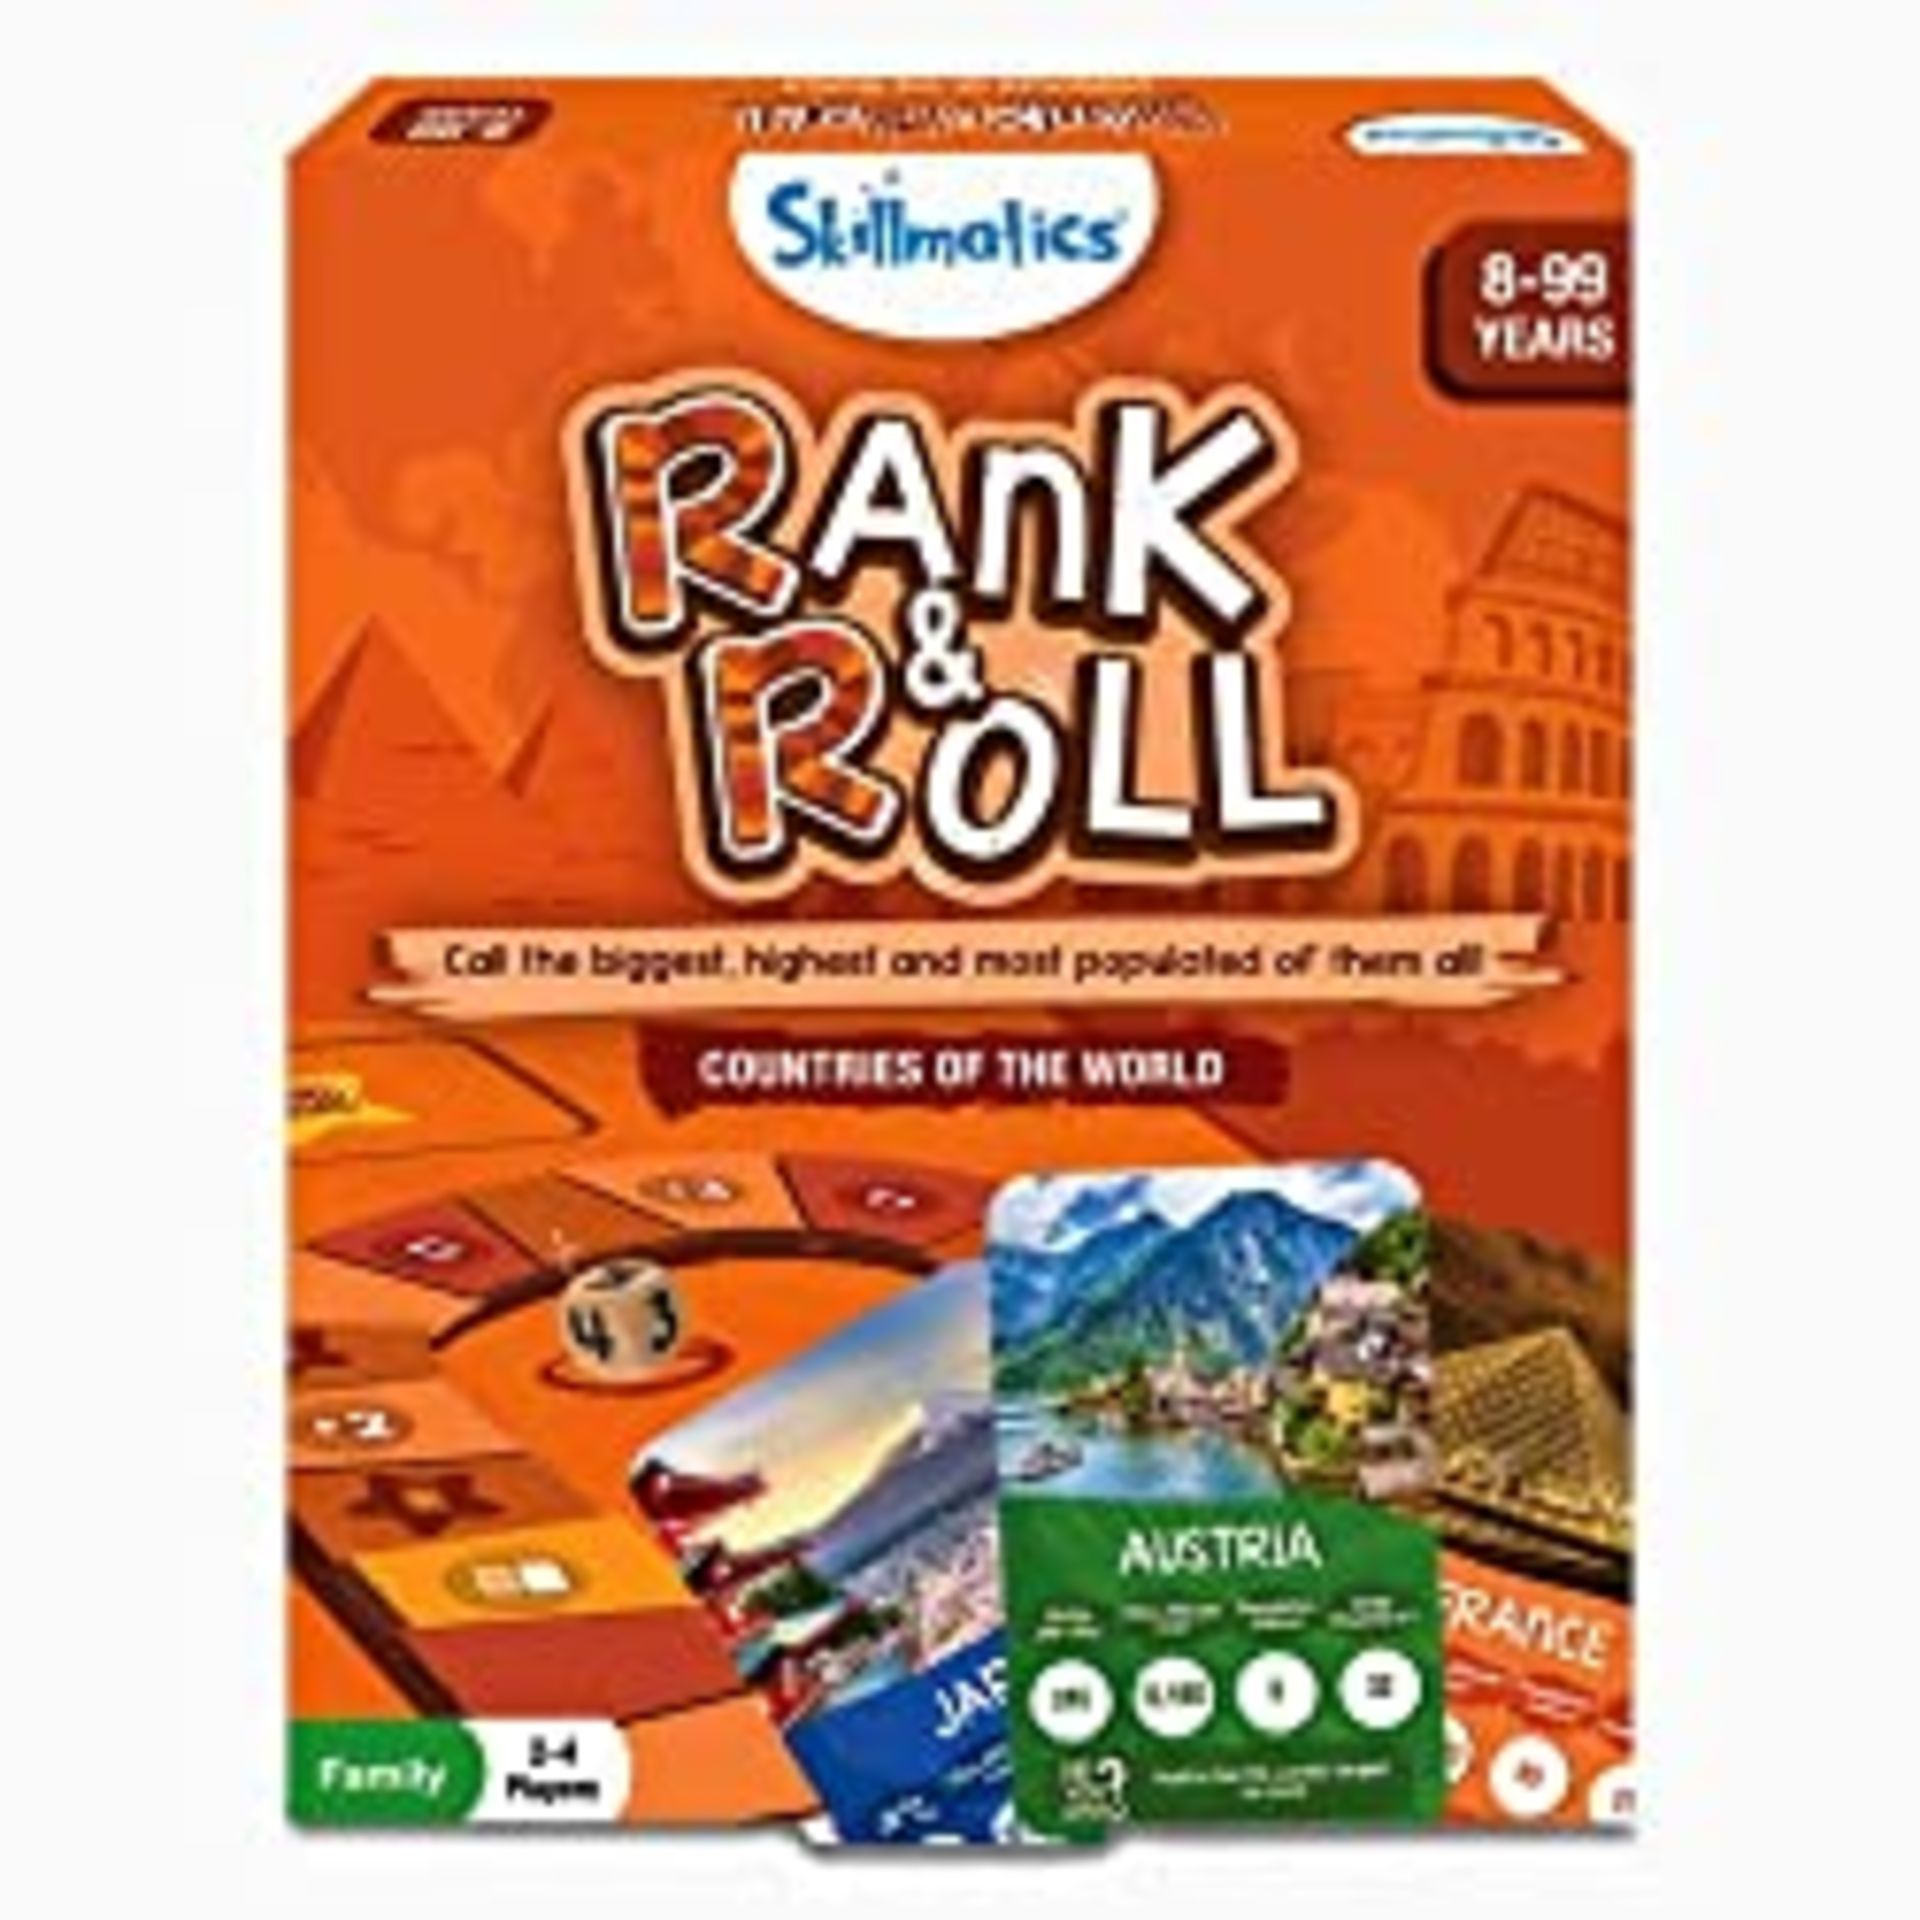 RRP £24.55 BRAND NEW STOCK Skillmatics Trump Card & Board Game - Rank & Roll Countries of The World